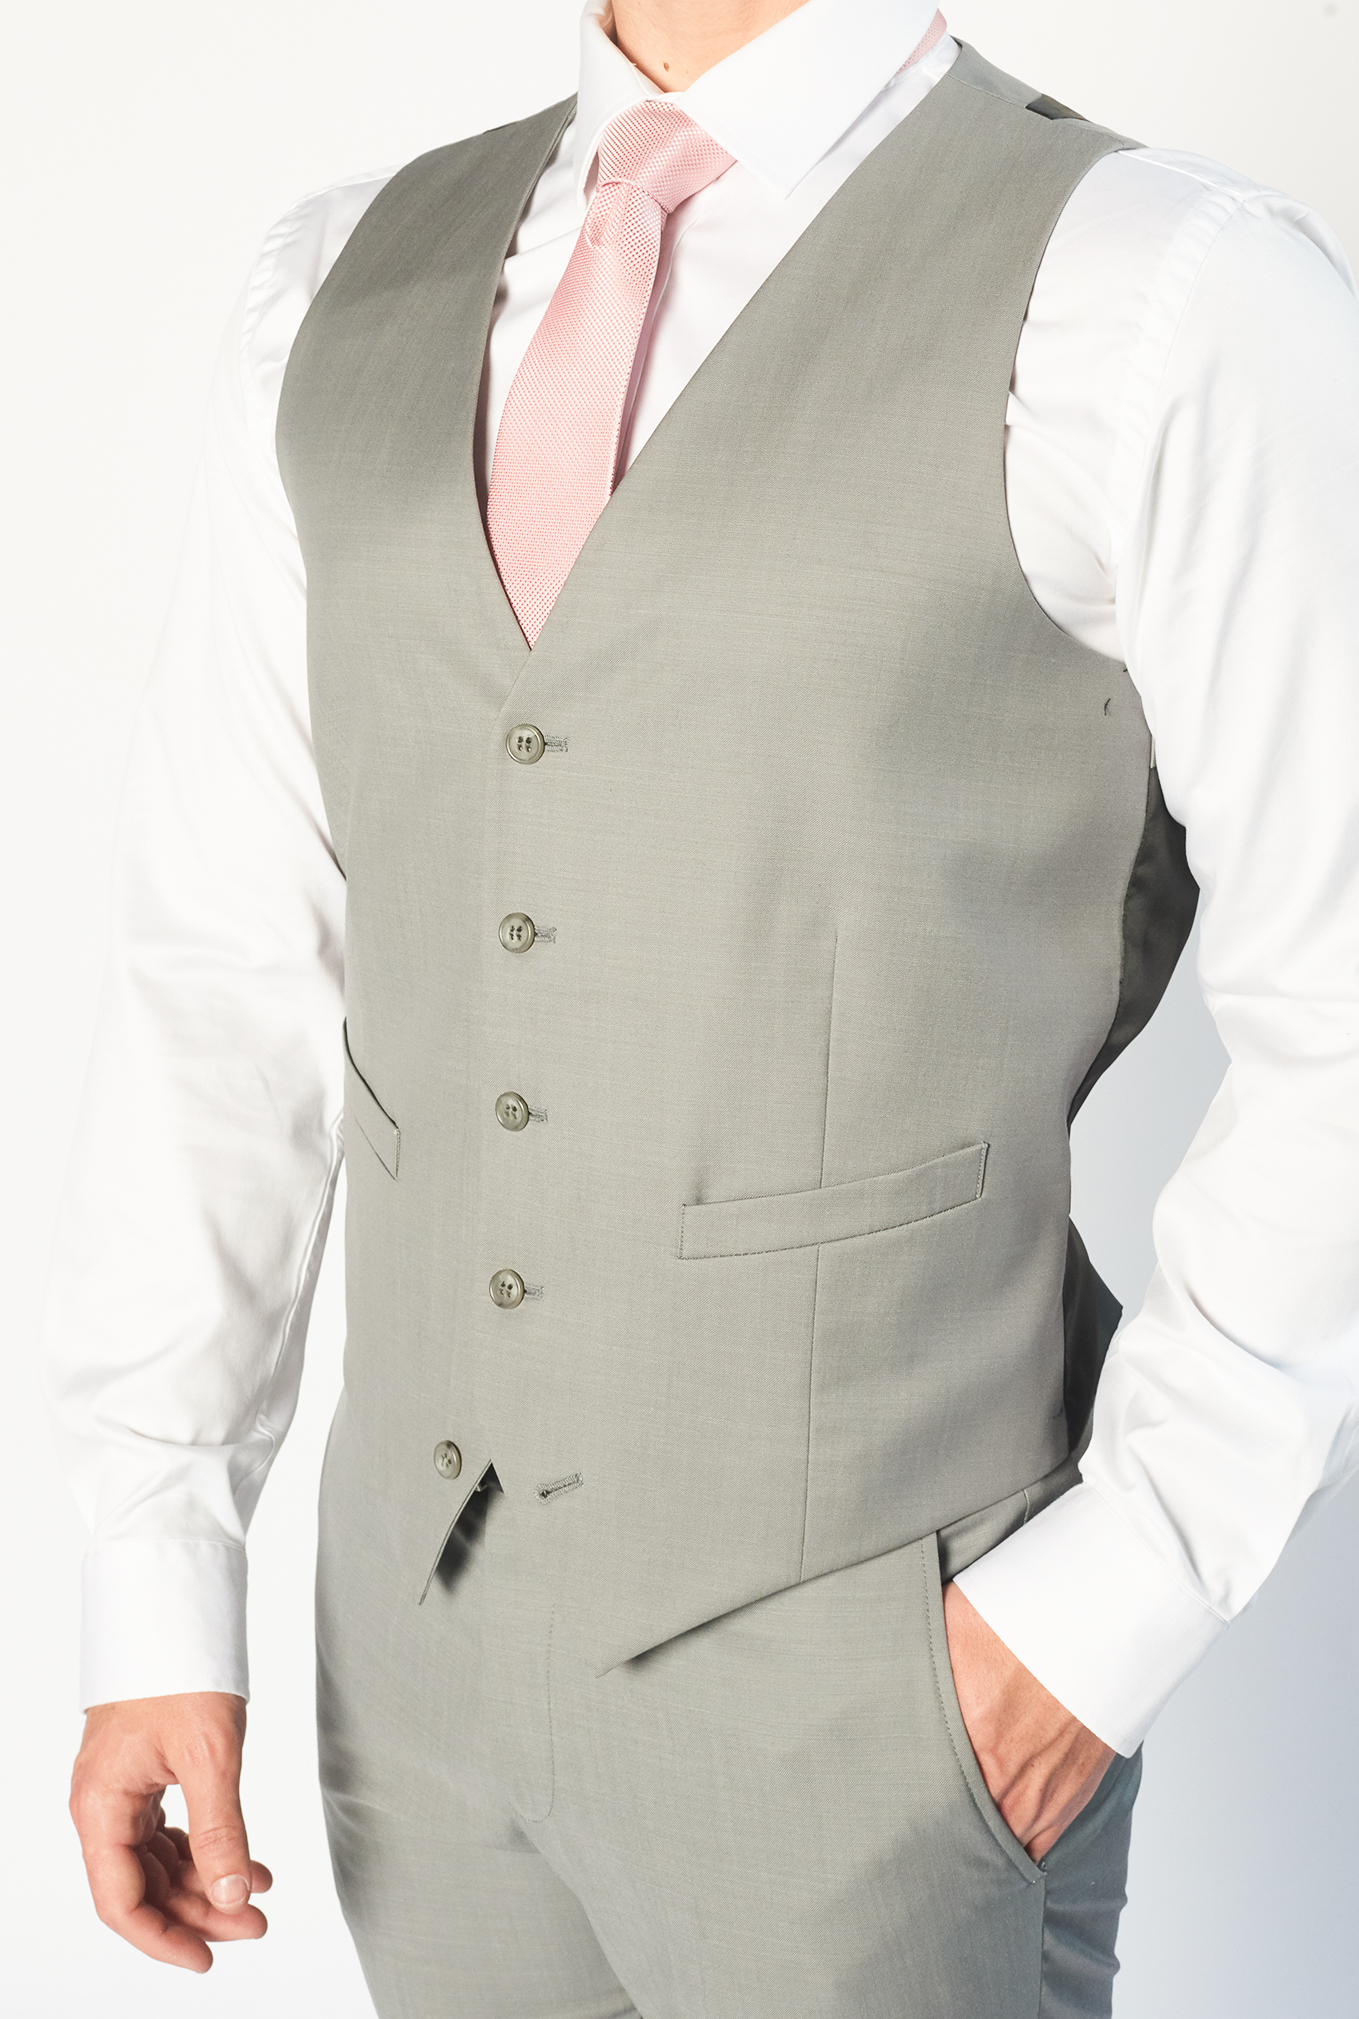 The Jet | Light Grey Suit for Hire | Perth WA | Britton's Formal Wear